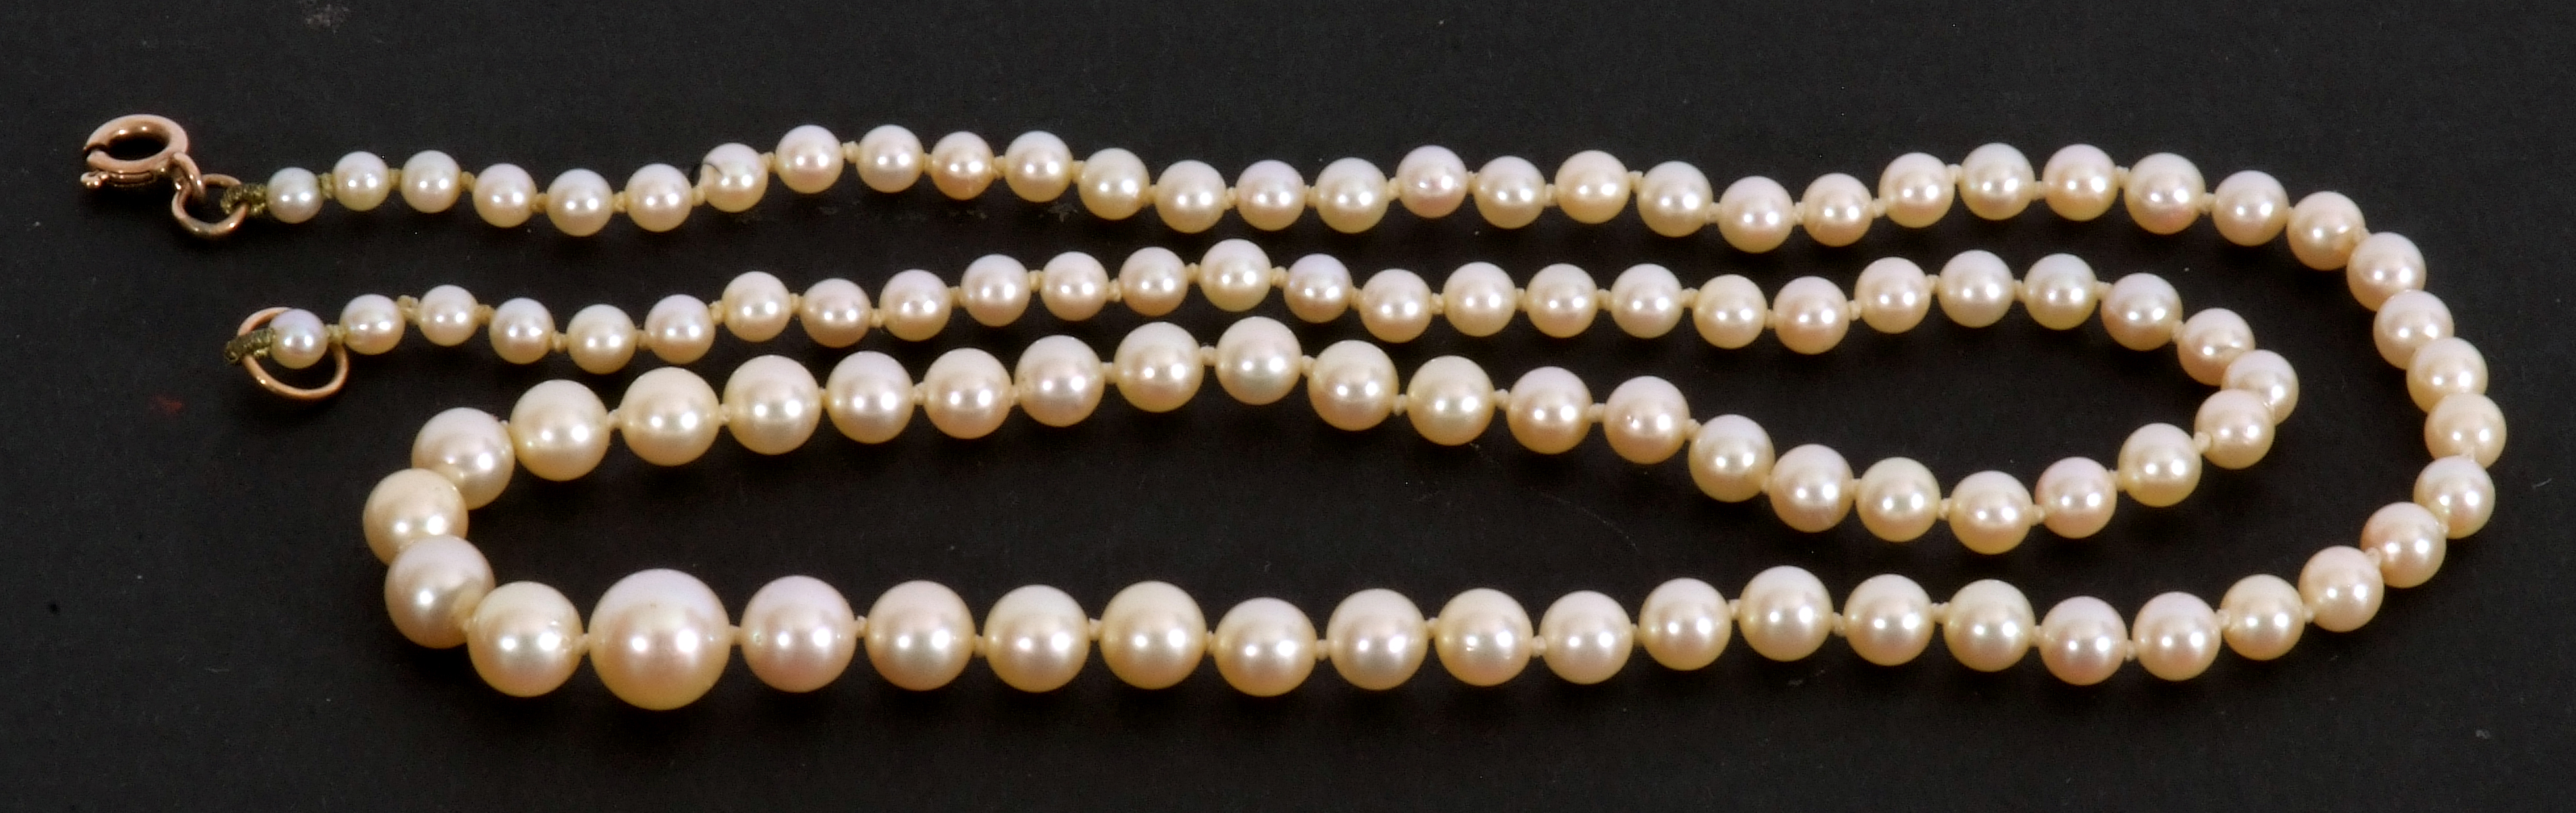 Single row of graduated cultured pearls, 6mm-2mm, 49cm long, to a 9K stamped later clasp fitting - Image 2 of 4